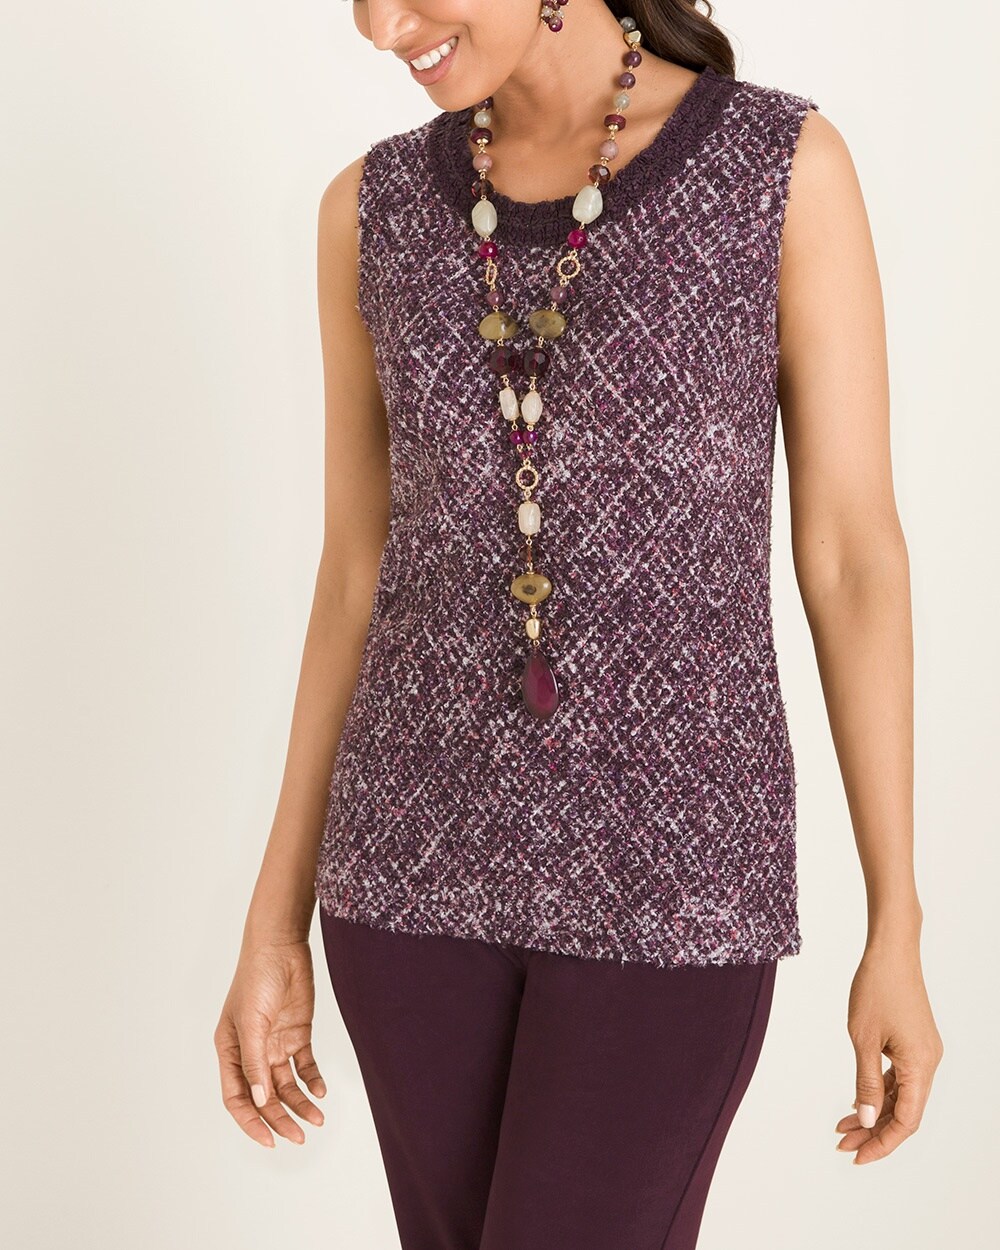 Travelers Collection Texture Tweed Tank